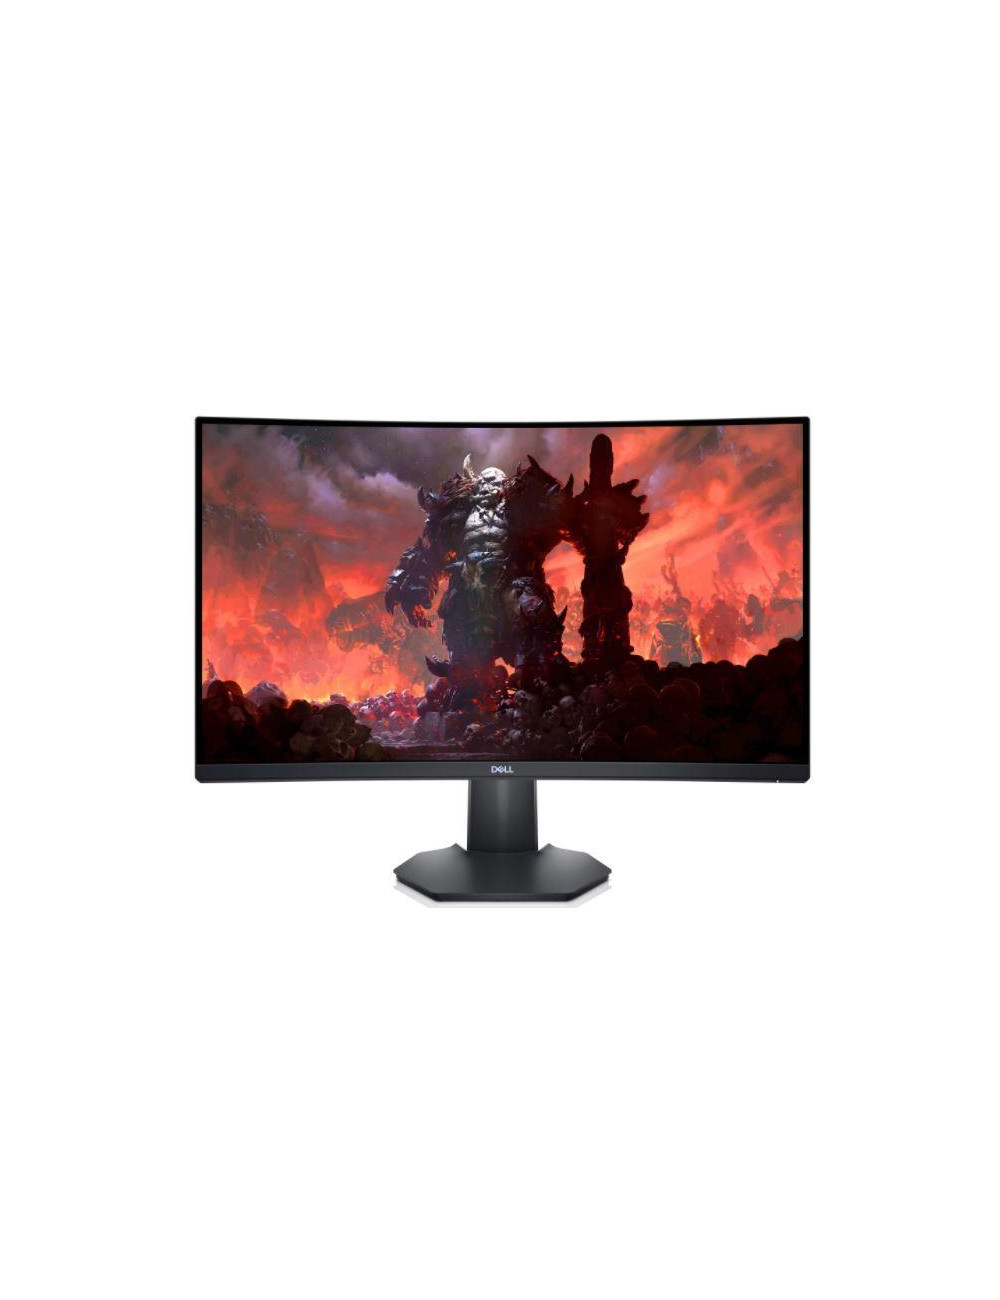 LCD Monitor|DELL|S3222DGM|31.5"|Gaming/Curved|Panel VA|2560x1440|16:9|Matte|8 ms|Height adjustable|Tilt|210-AZZH